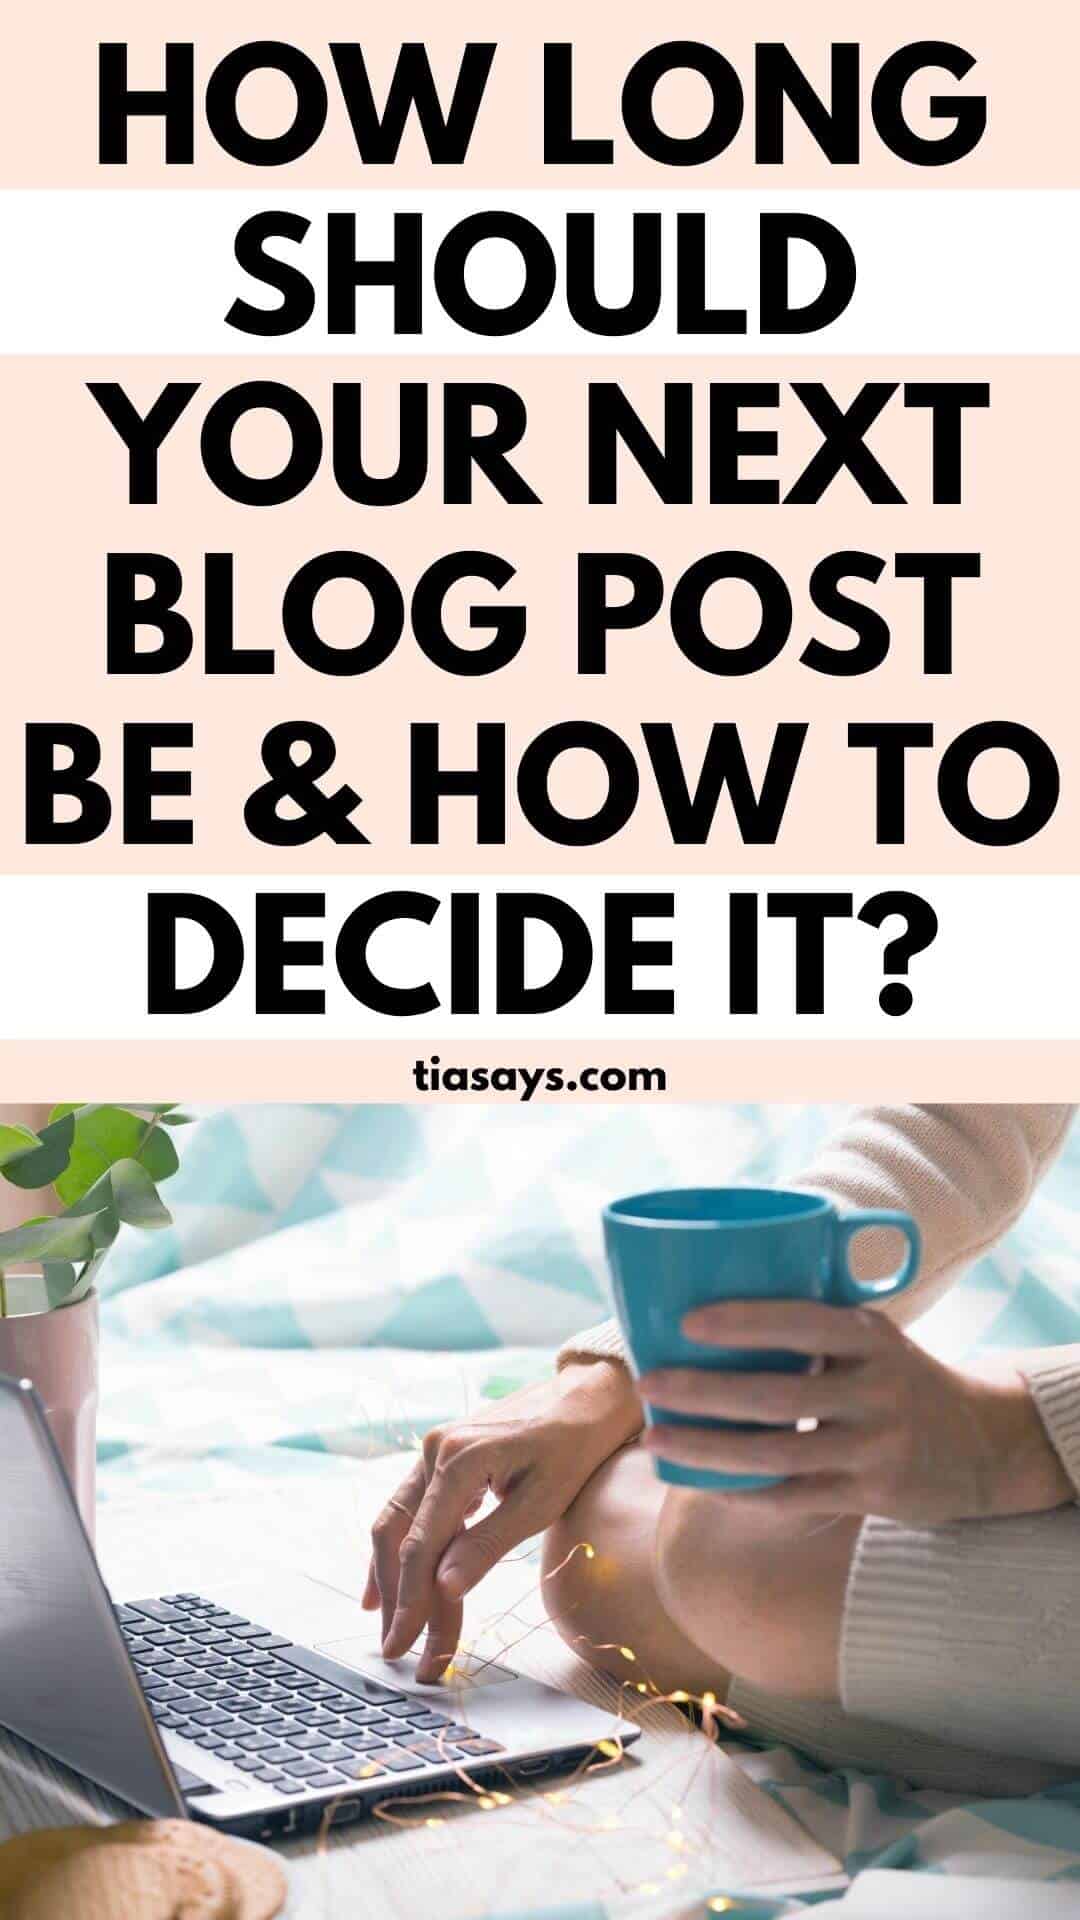 how long should your blog post be?